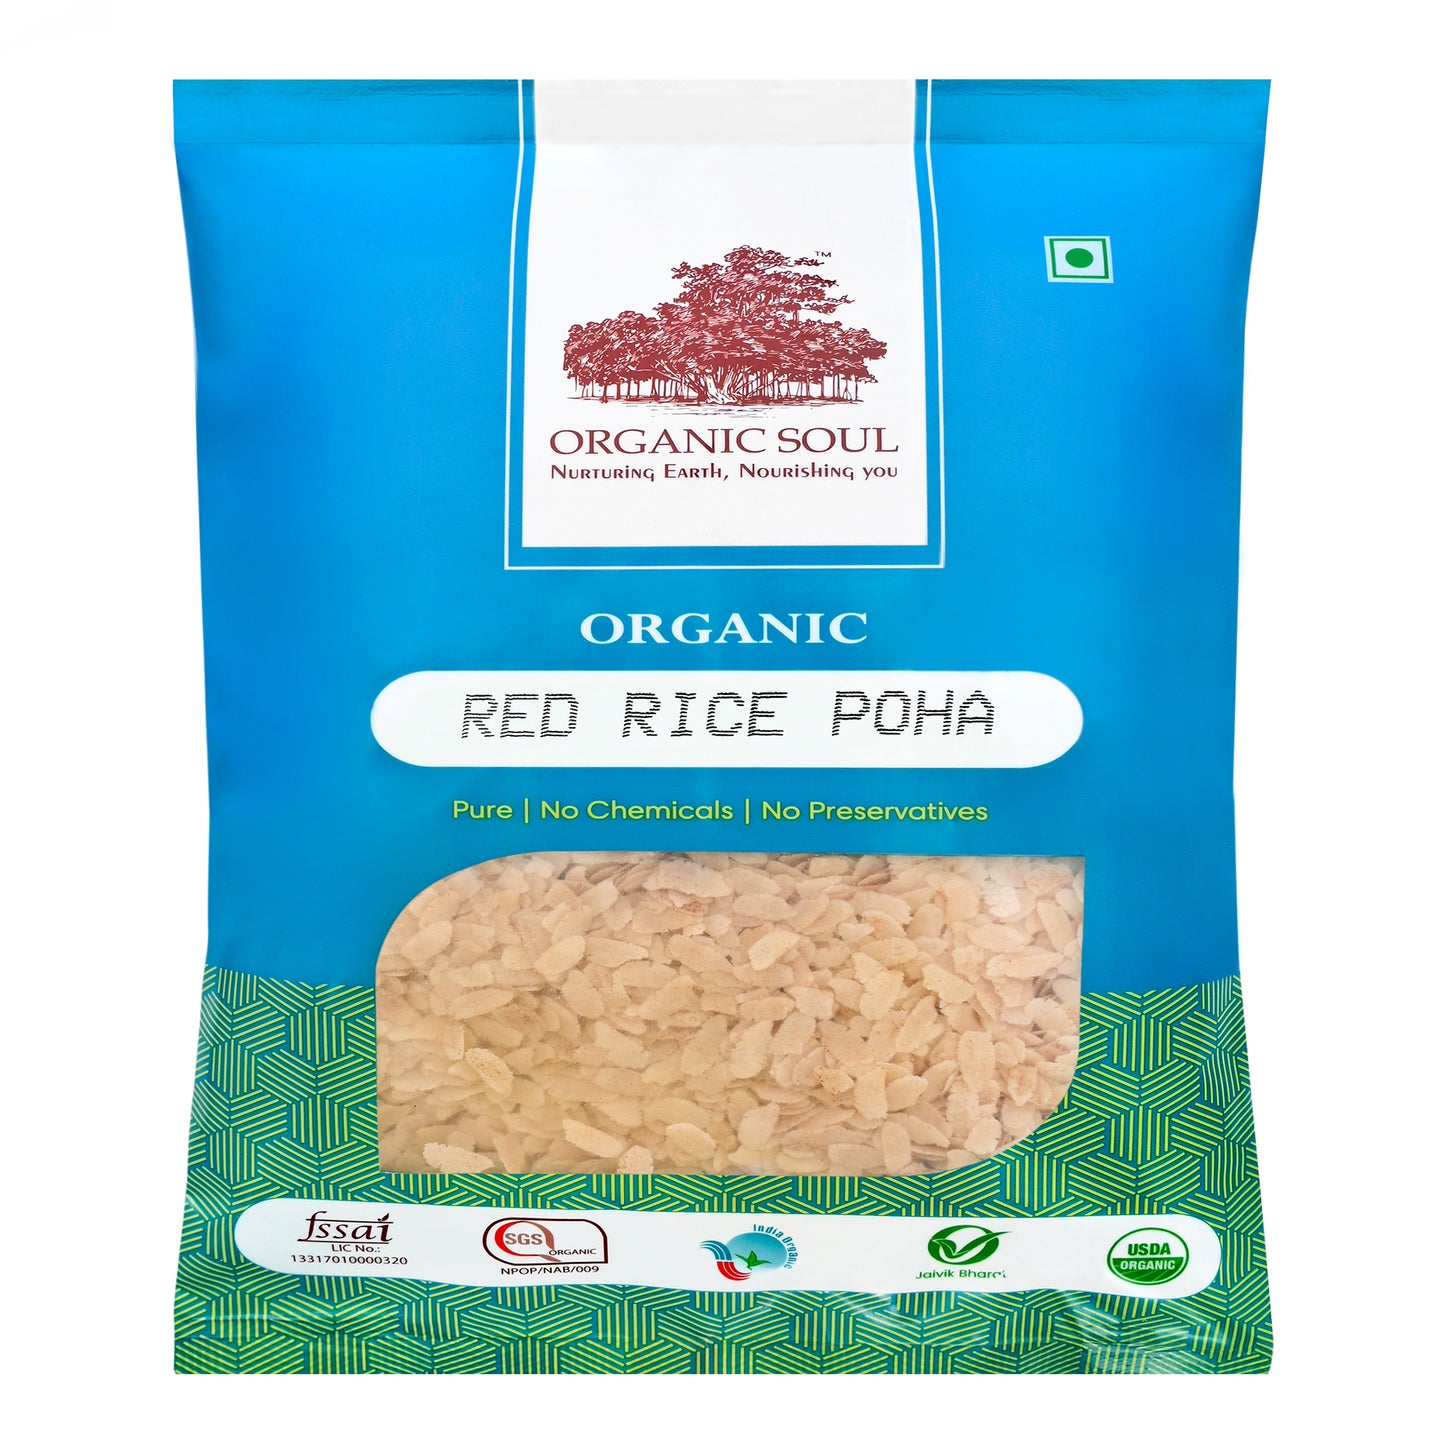 Organic Soul - Organic Red Rice Poha, (450 Gm Or 900 Gm)| Enriched with Dietary Fibers, Healthy Flattened Rice